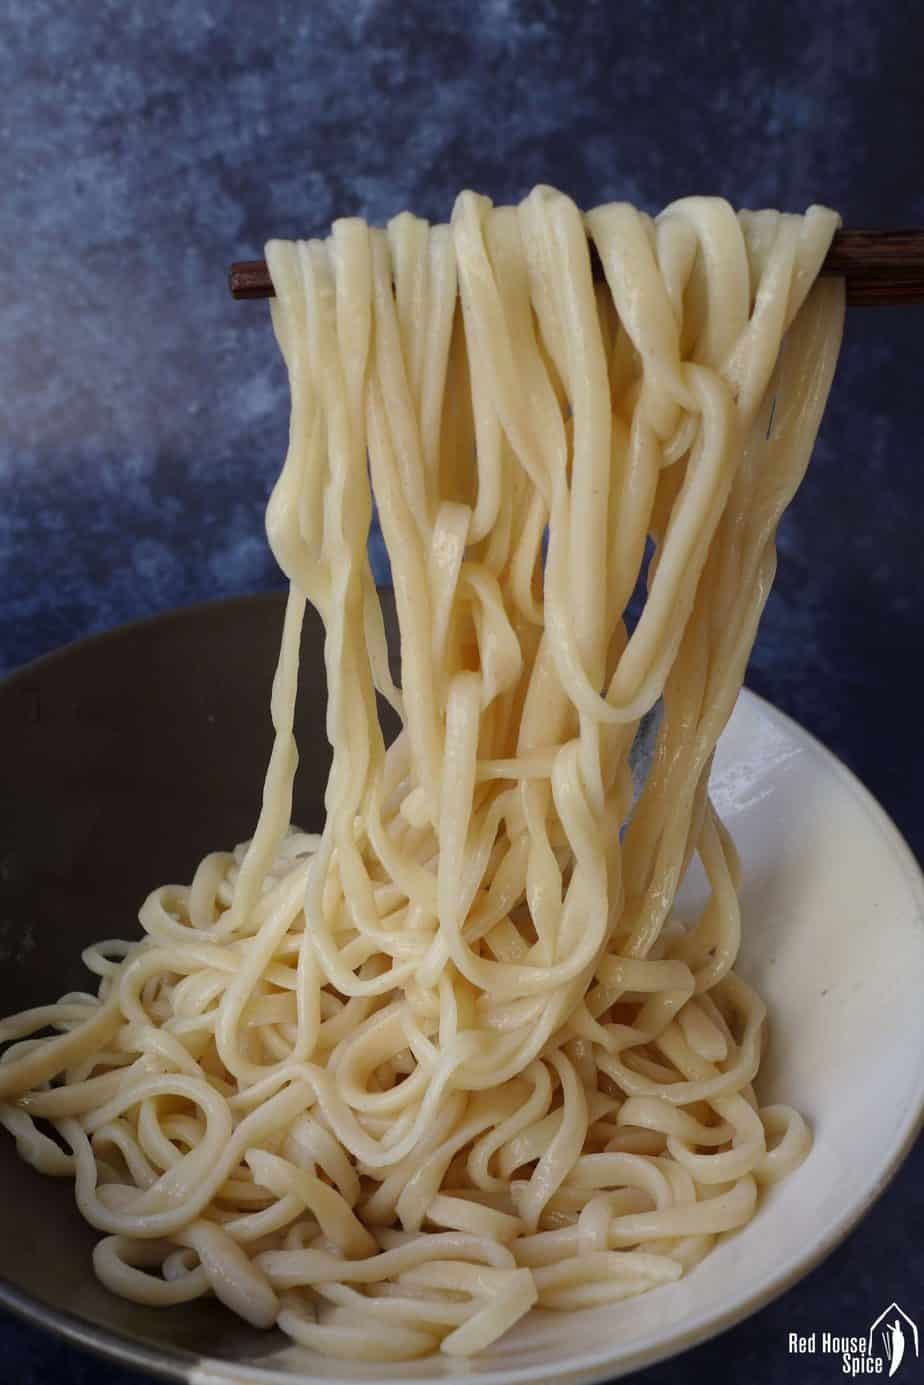 Hand-pulled noodles picked up by a pair of chopsticks